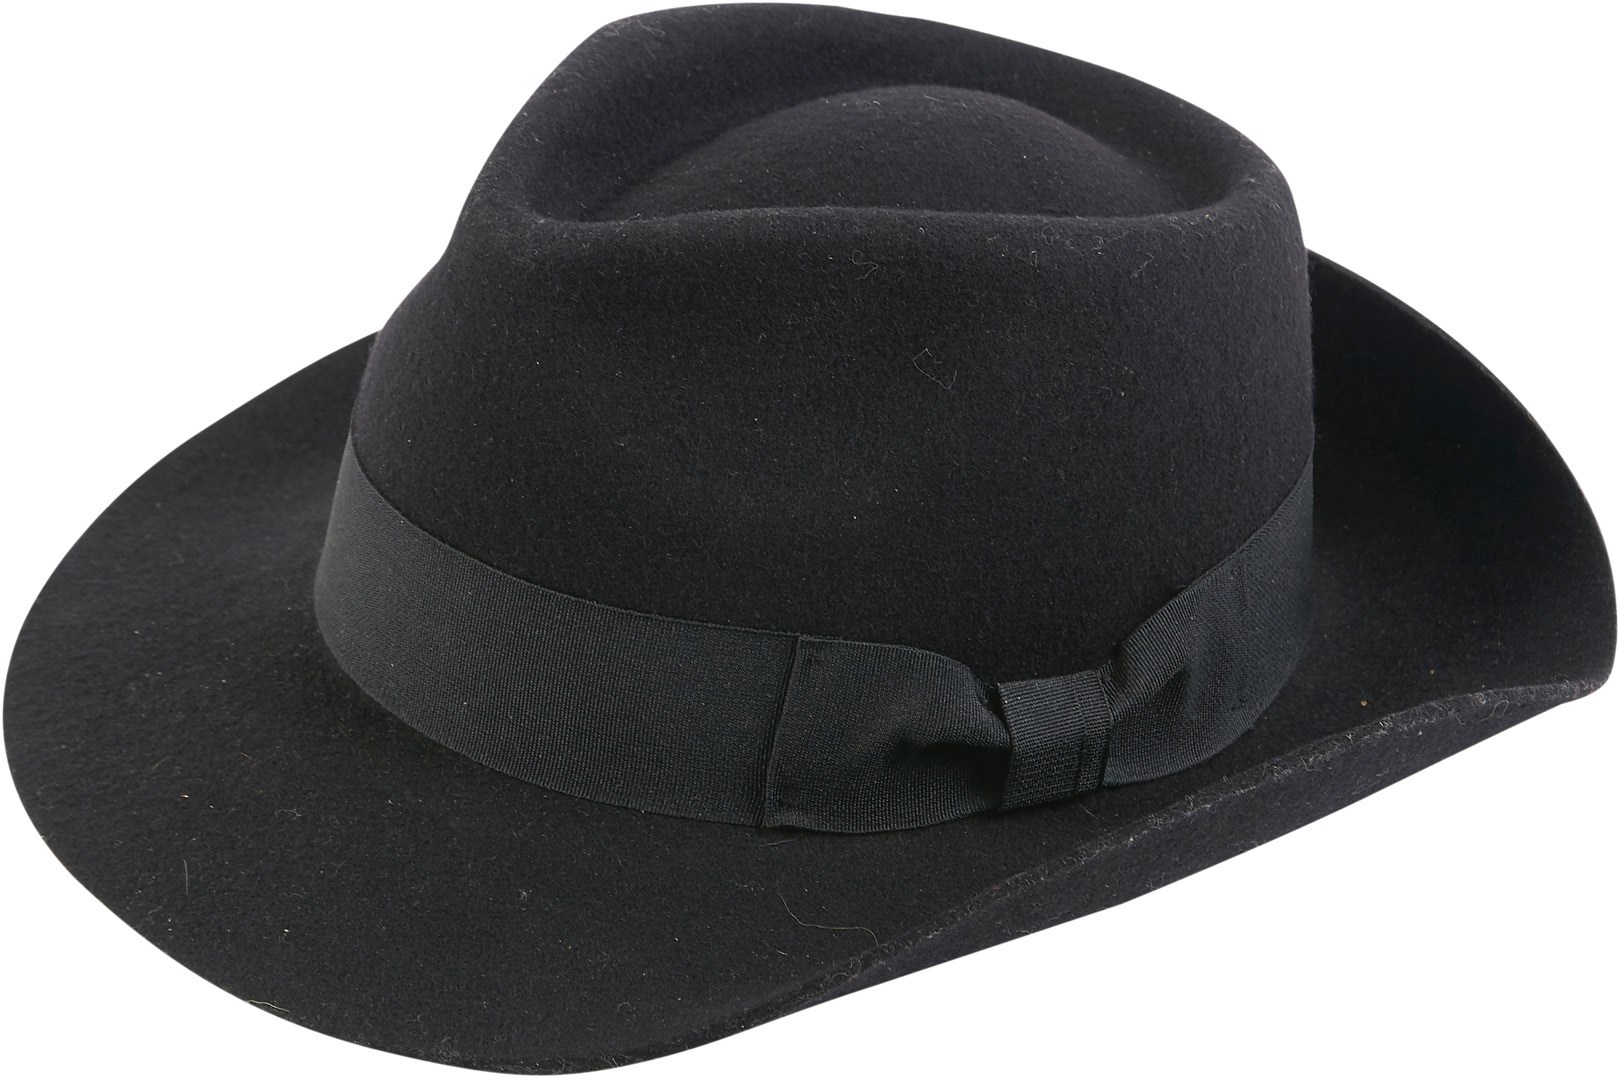 Rock 'N' Roll - 1996-97 Michael Jackson Fedora from his Production Manager